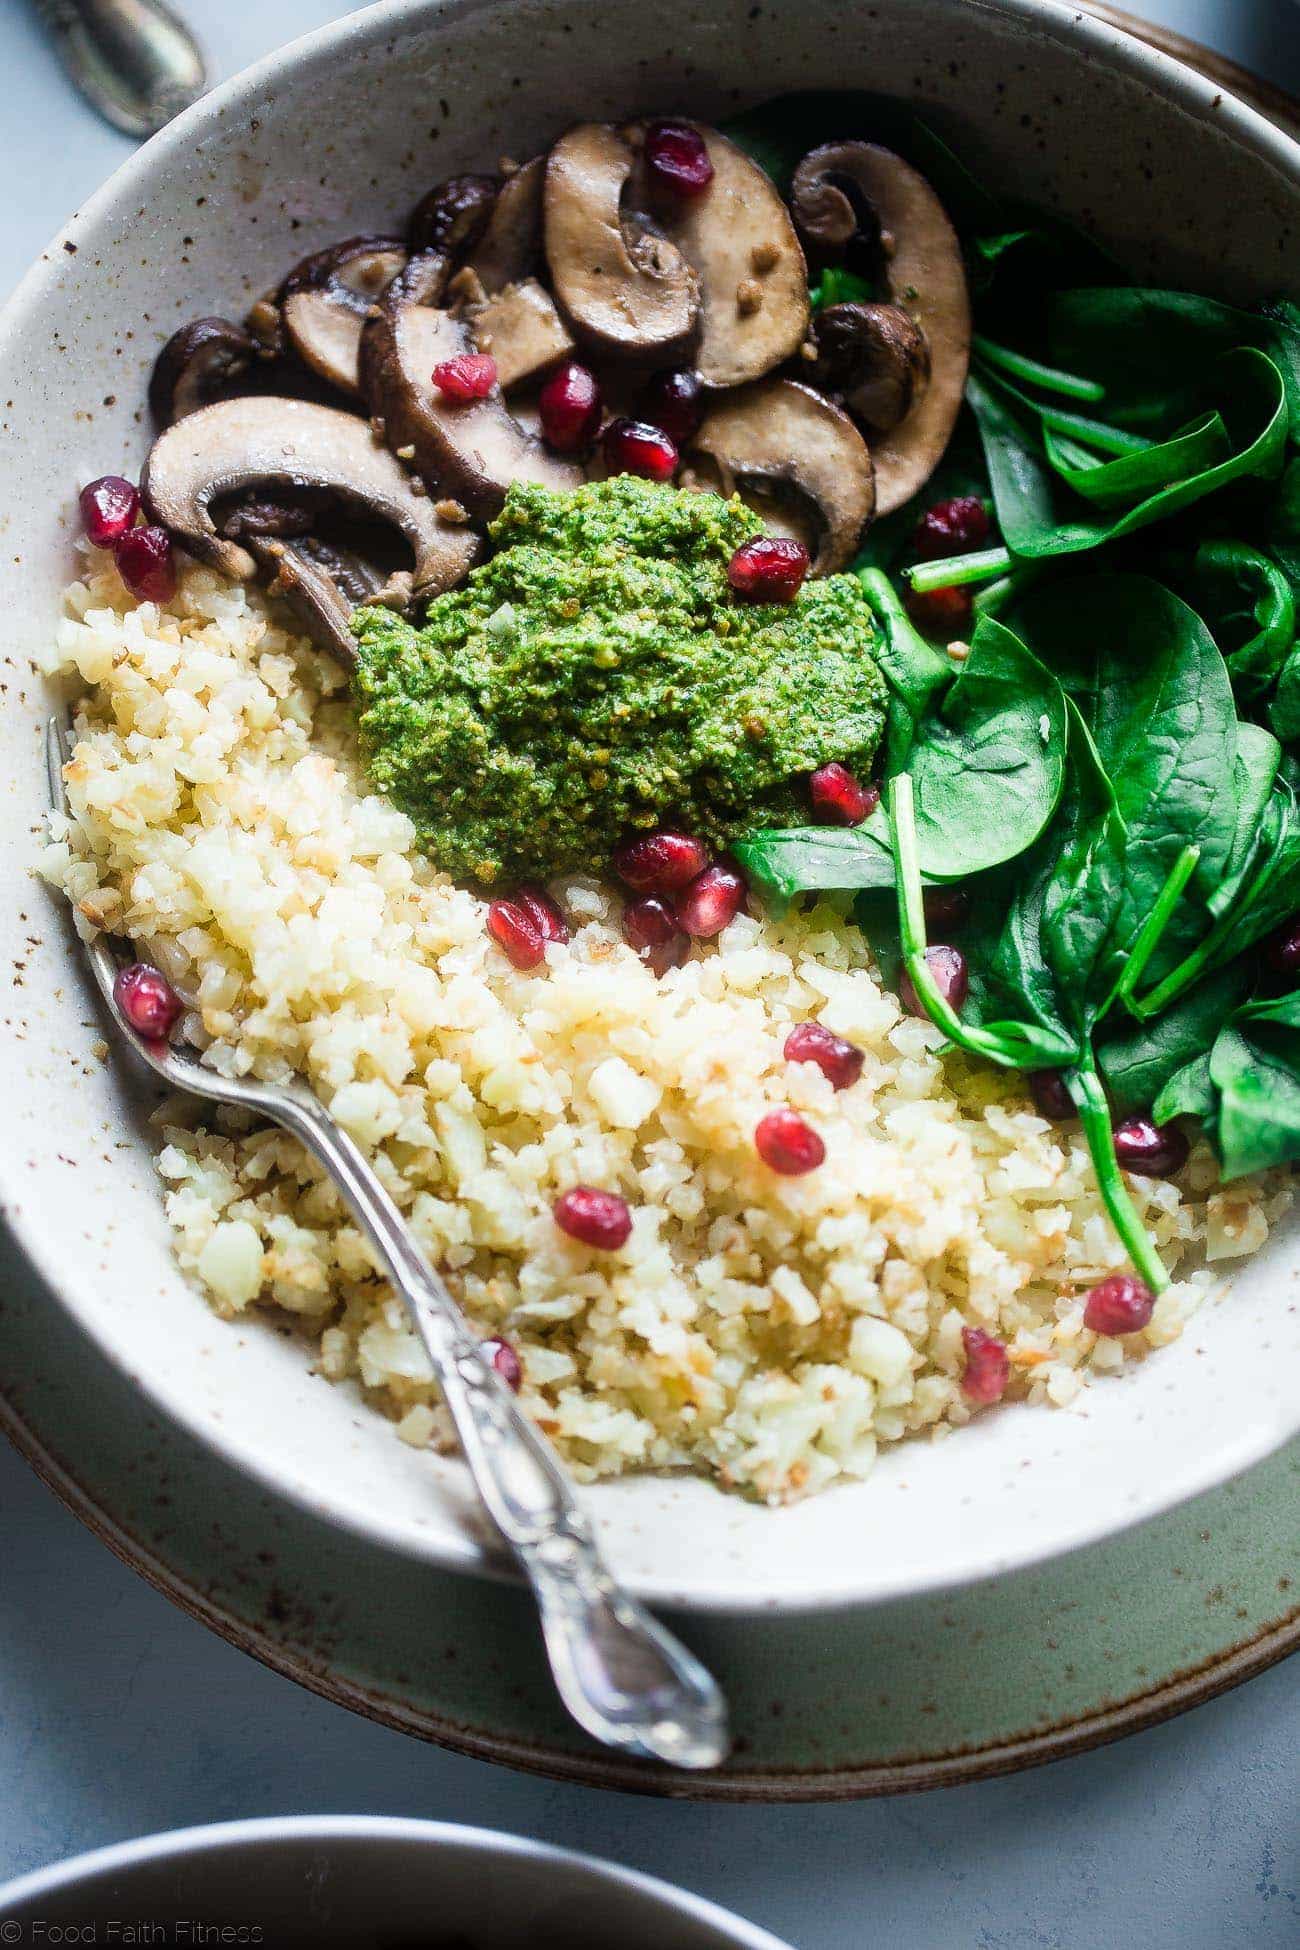 Vegan Detox Cauliflower Bowls - These low carb bowls are packed with veggies and a delicious almond pesto! They're a whole30 compliant, vegan and paleo friendly meal that is only 200 calories! | Foodfaithfitness.com | @ FoodFaithFit